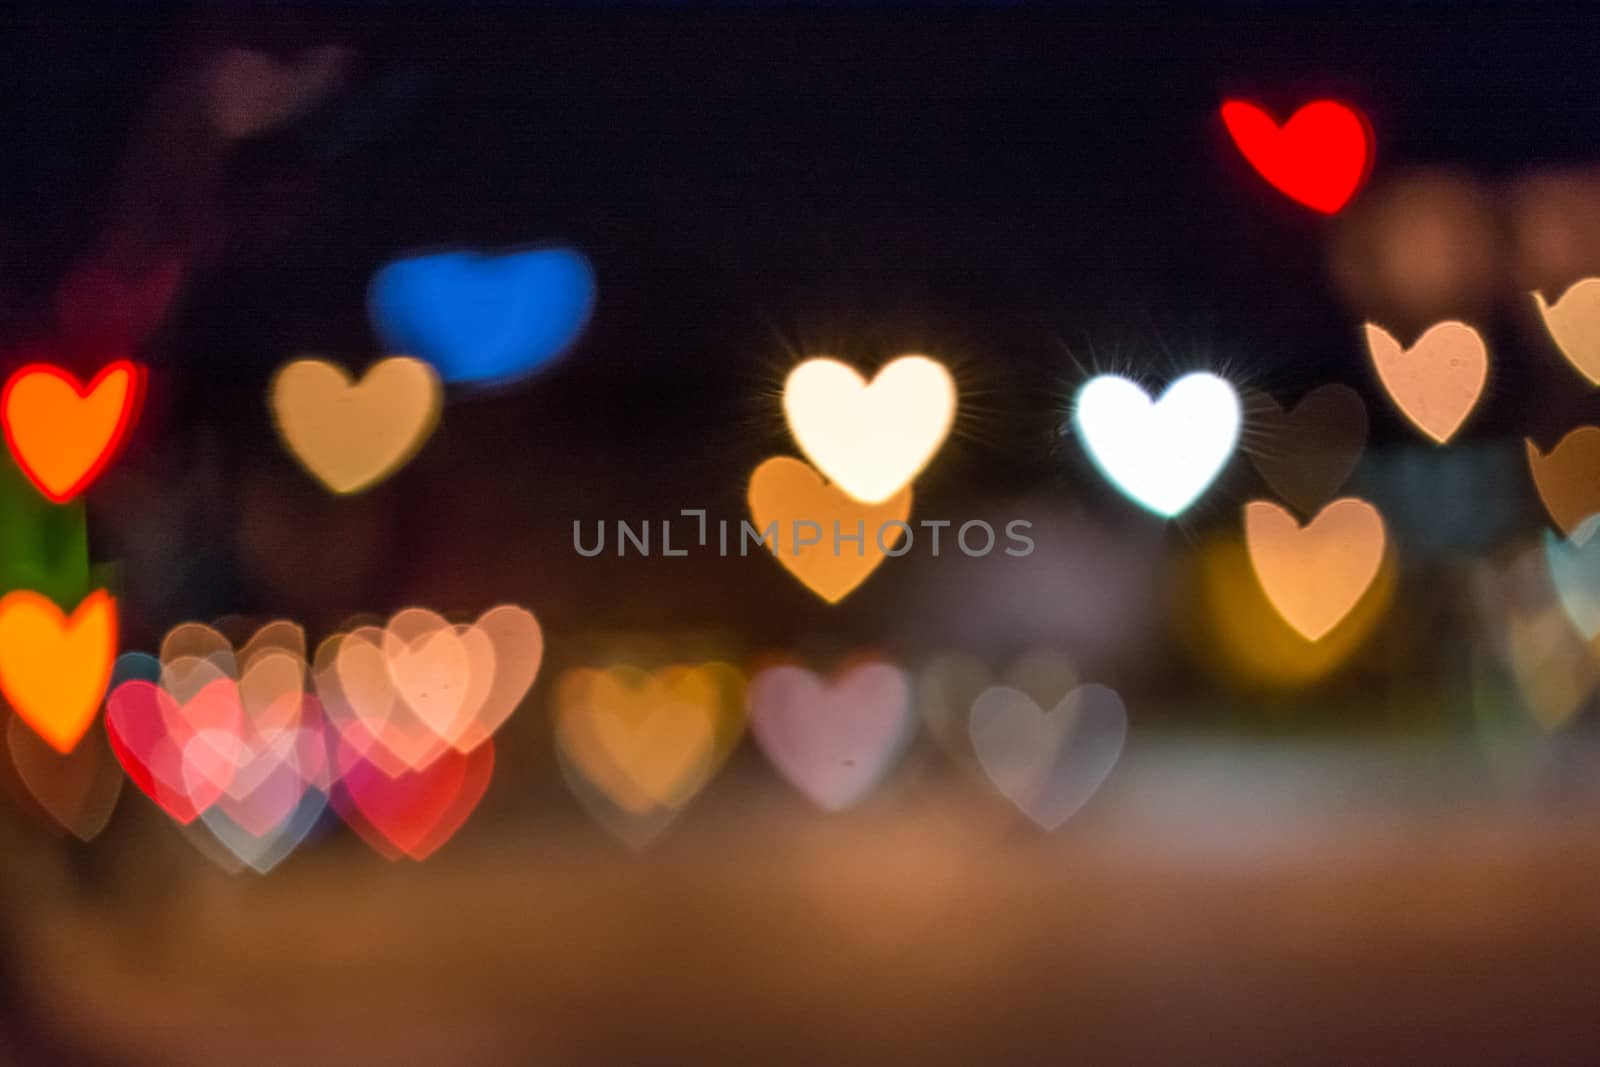 Background of out of focus area beautifully rendered in heart shape